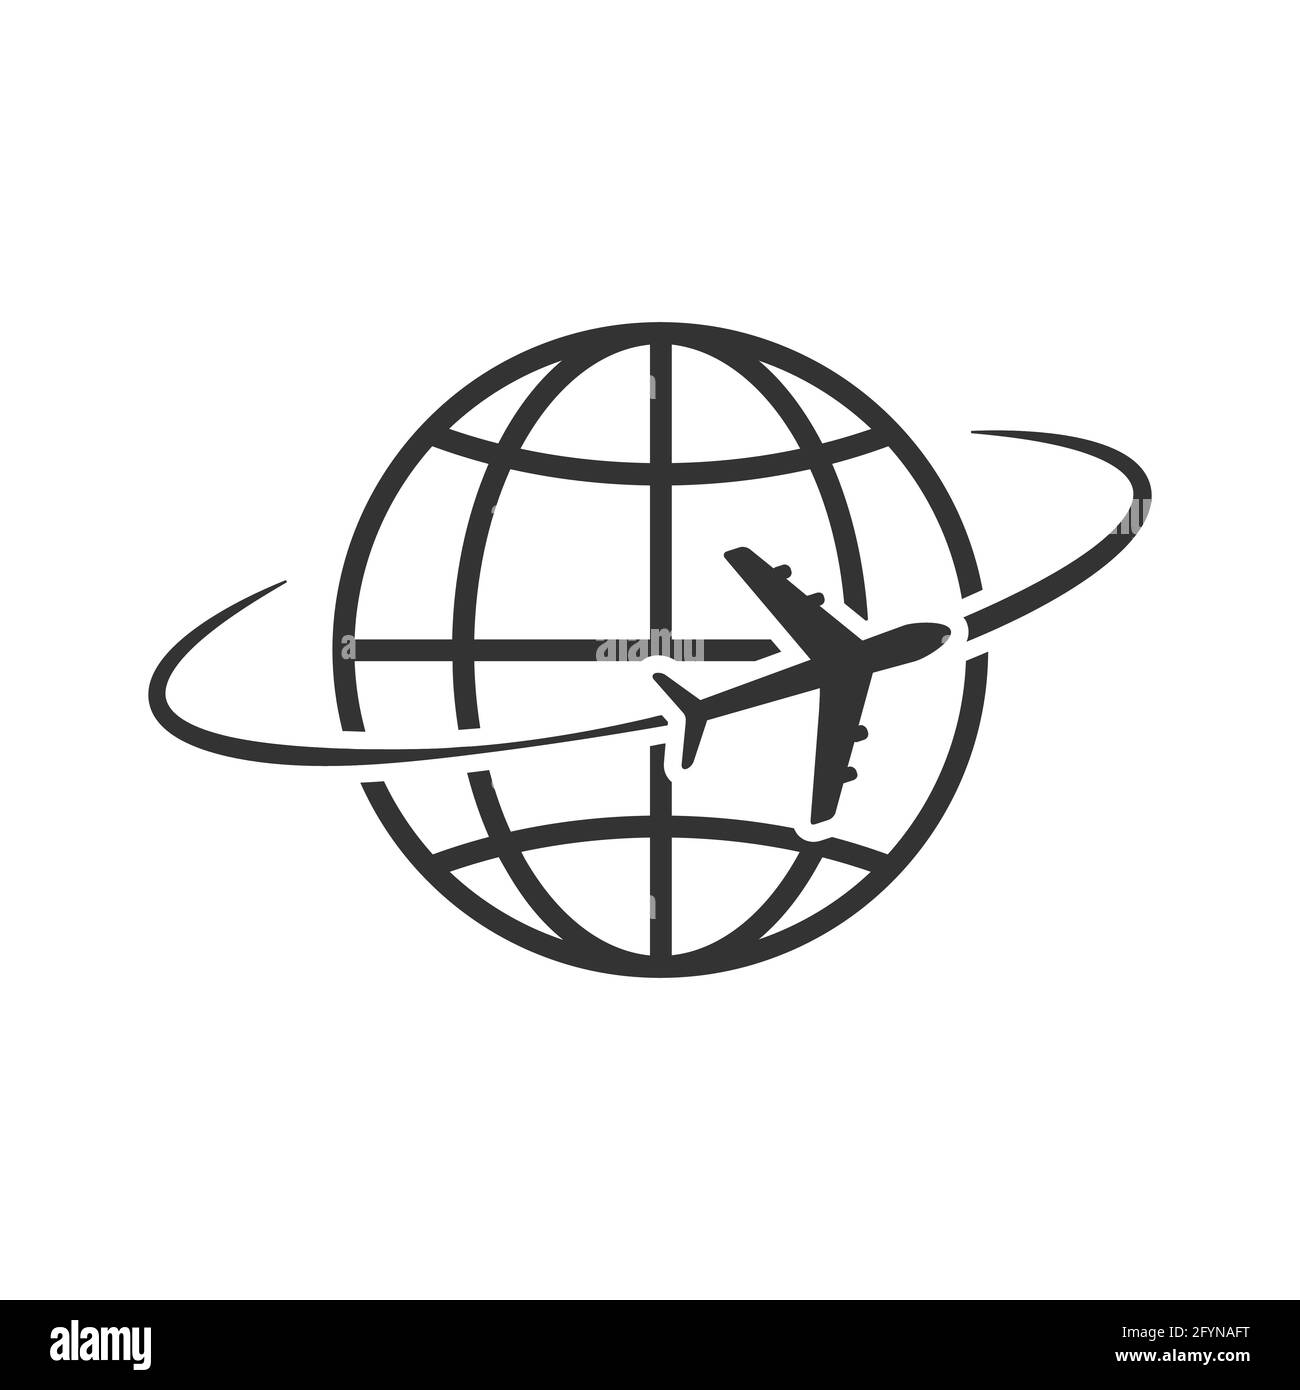 Airplane flying around world. Aircraft world concept. Travel symbol. Vector illustration isolated on white Stock Vector